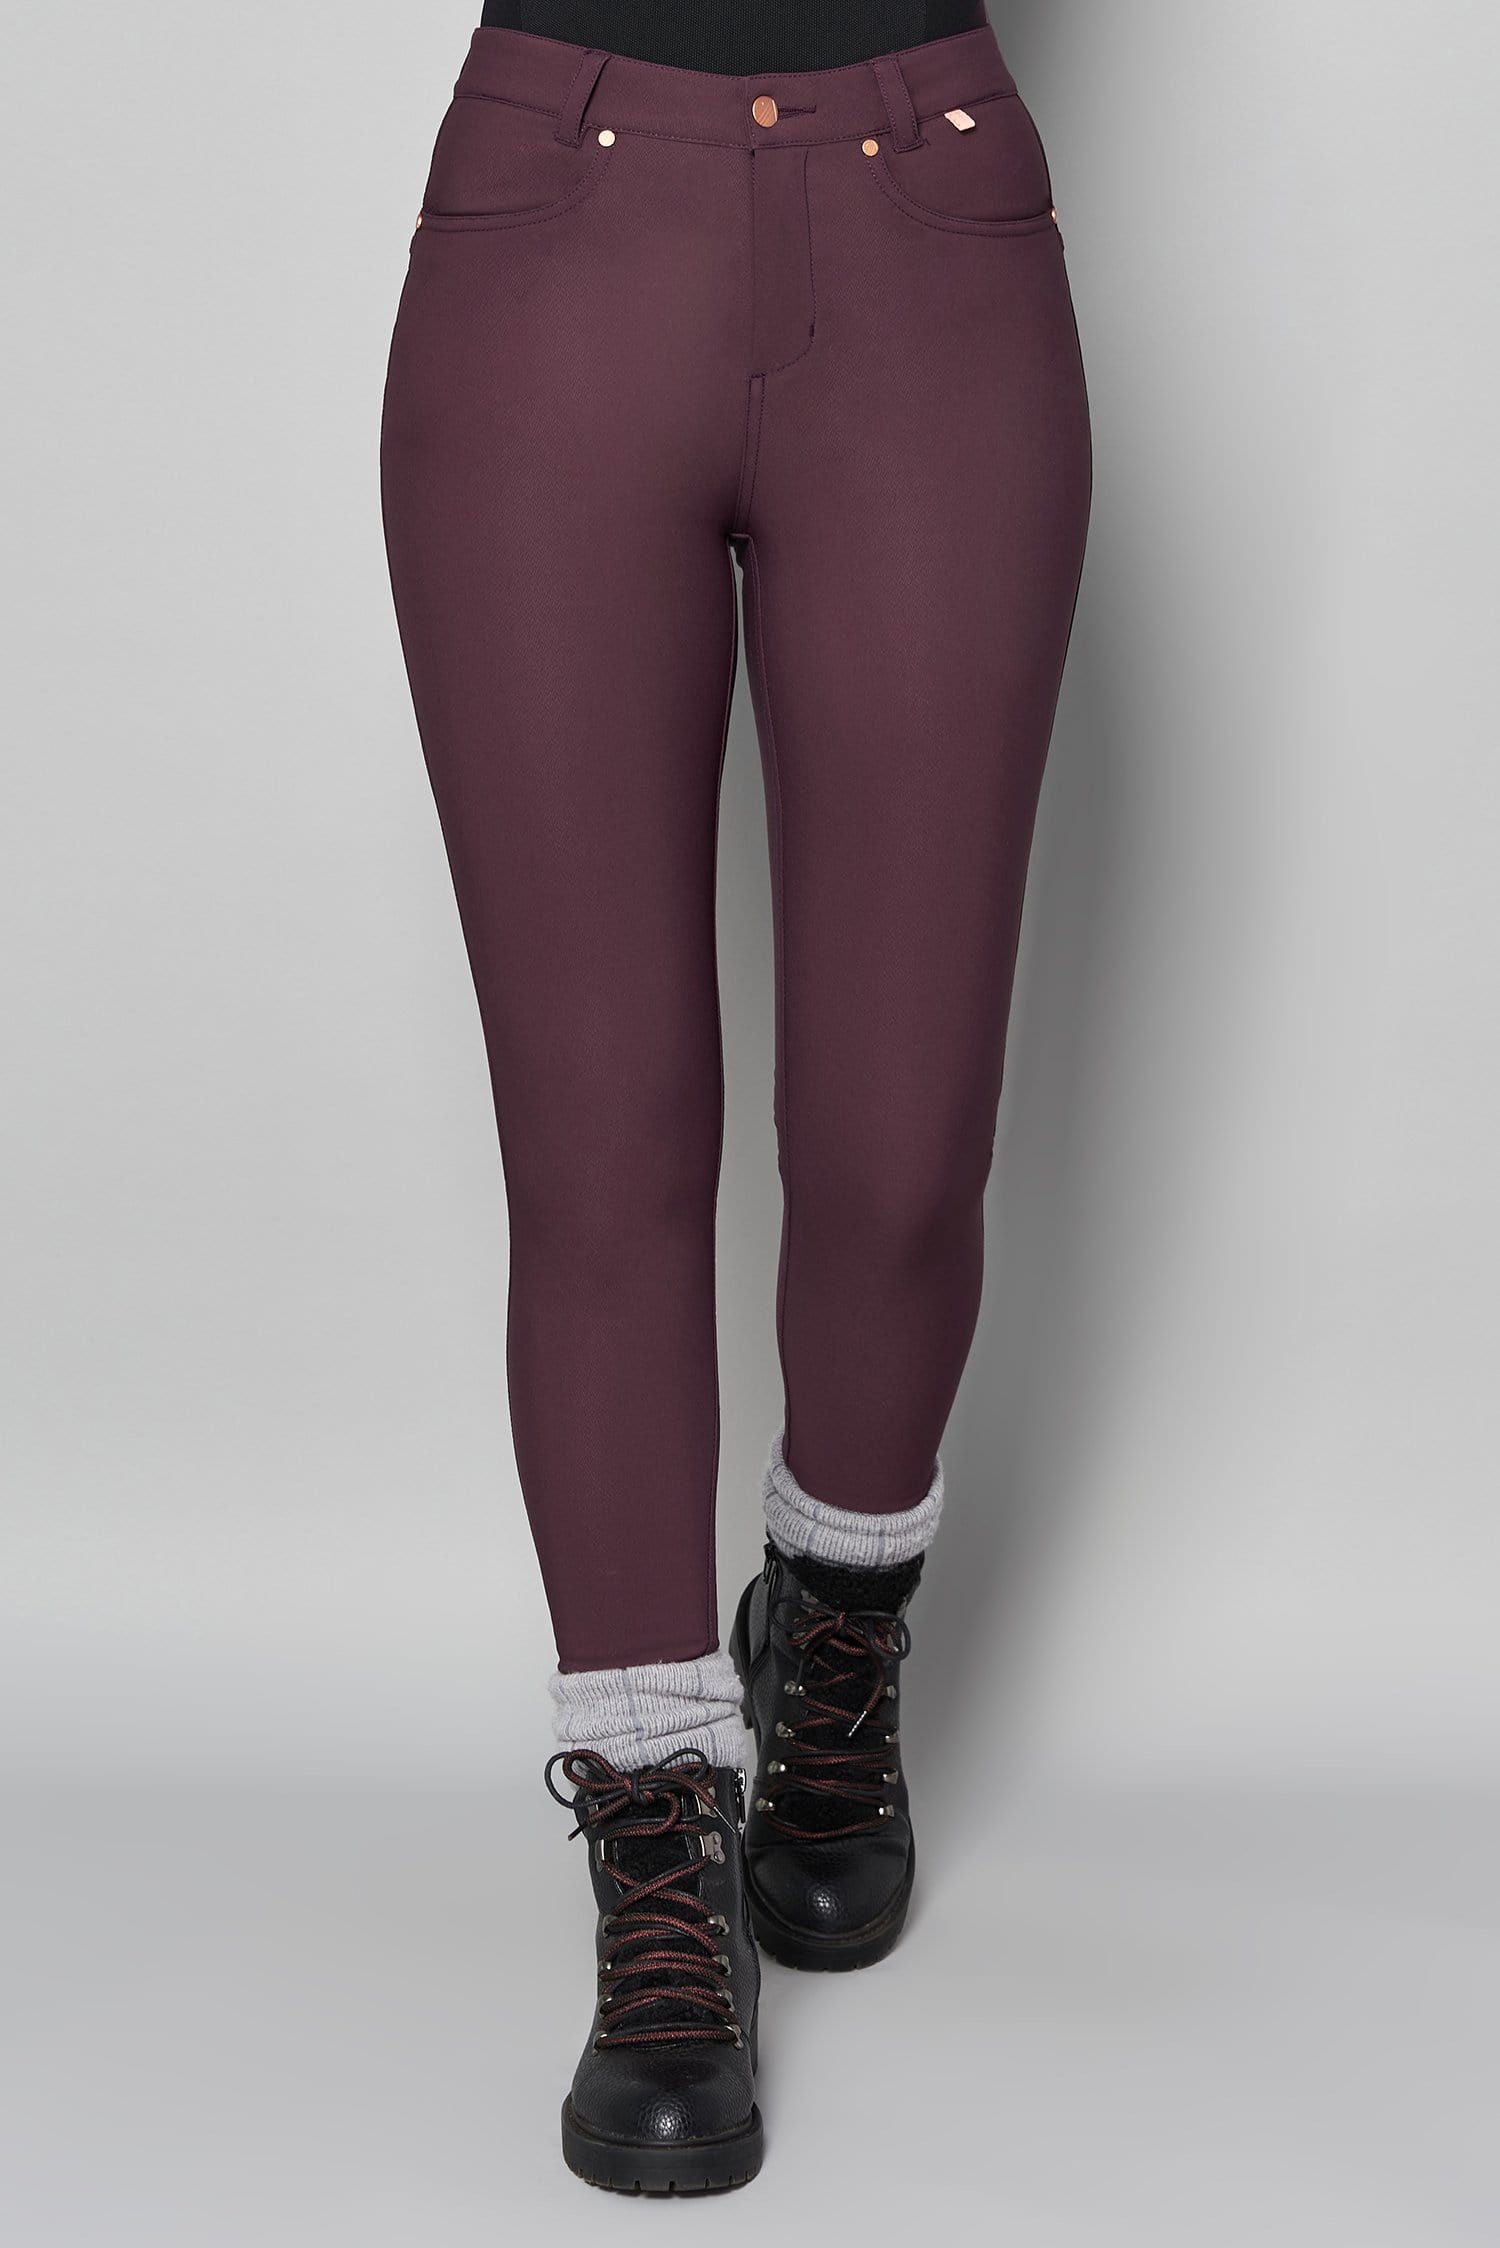 Thermal Skinny Outdoor Trousers - Aubergine - 40l / Uk22 - Womens - Acai Outdoorwear